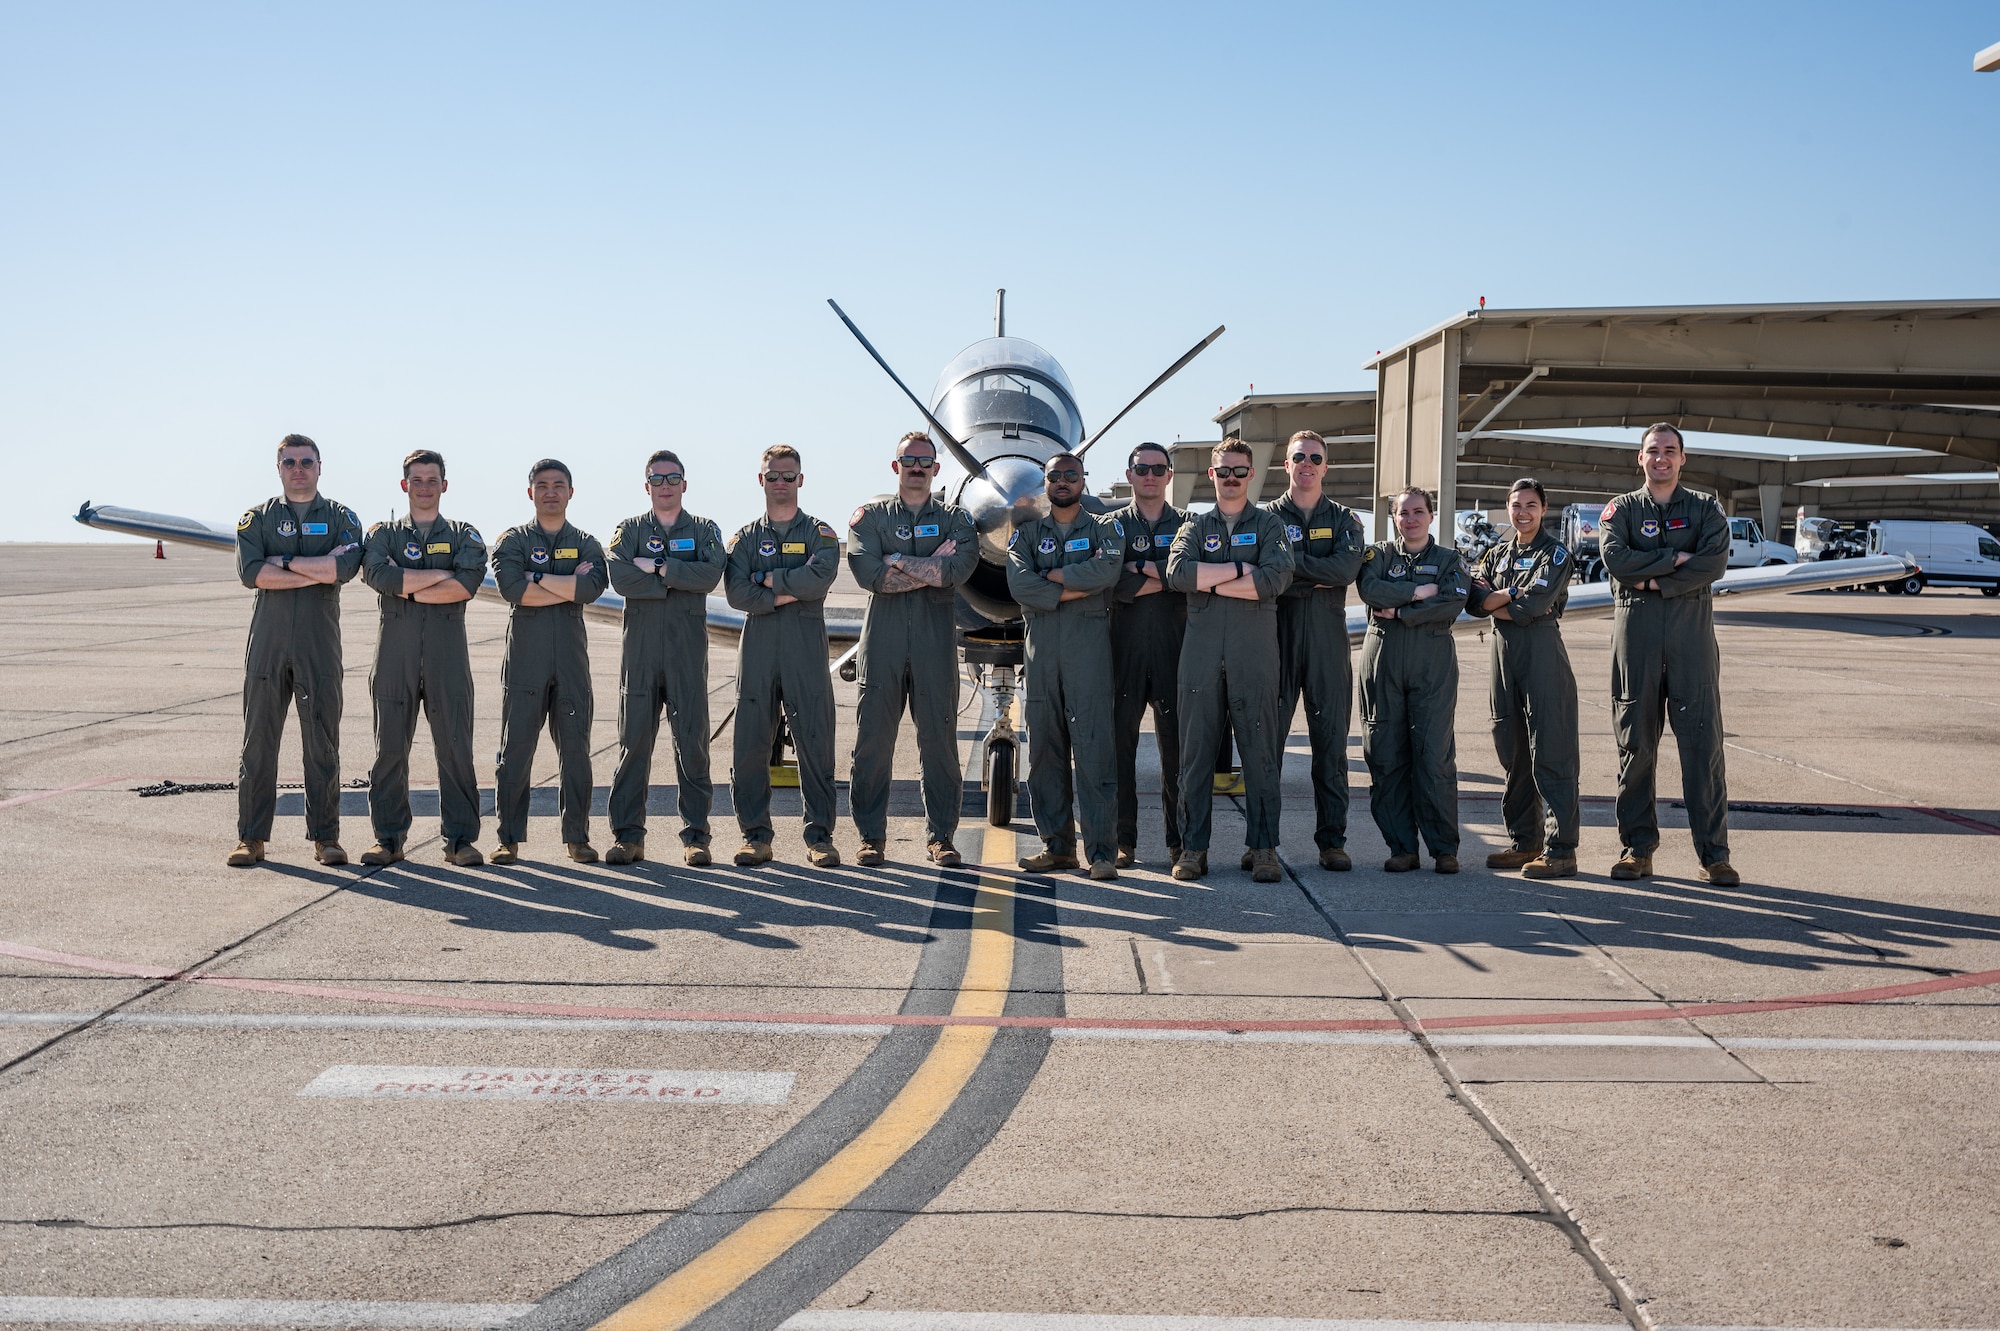 Seventeen U.S. Air Force officers were awarded silver wings during the ceremony, symbolizing their completion of the Undergraduate Pilot Training program.